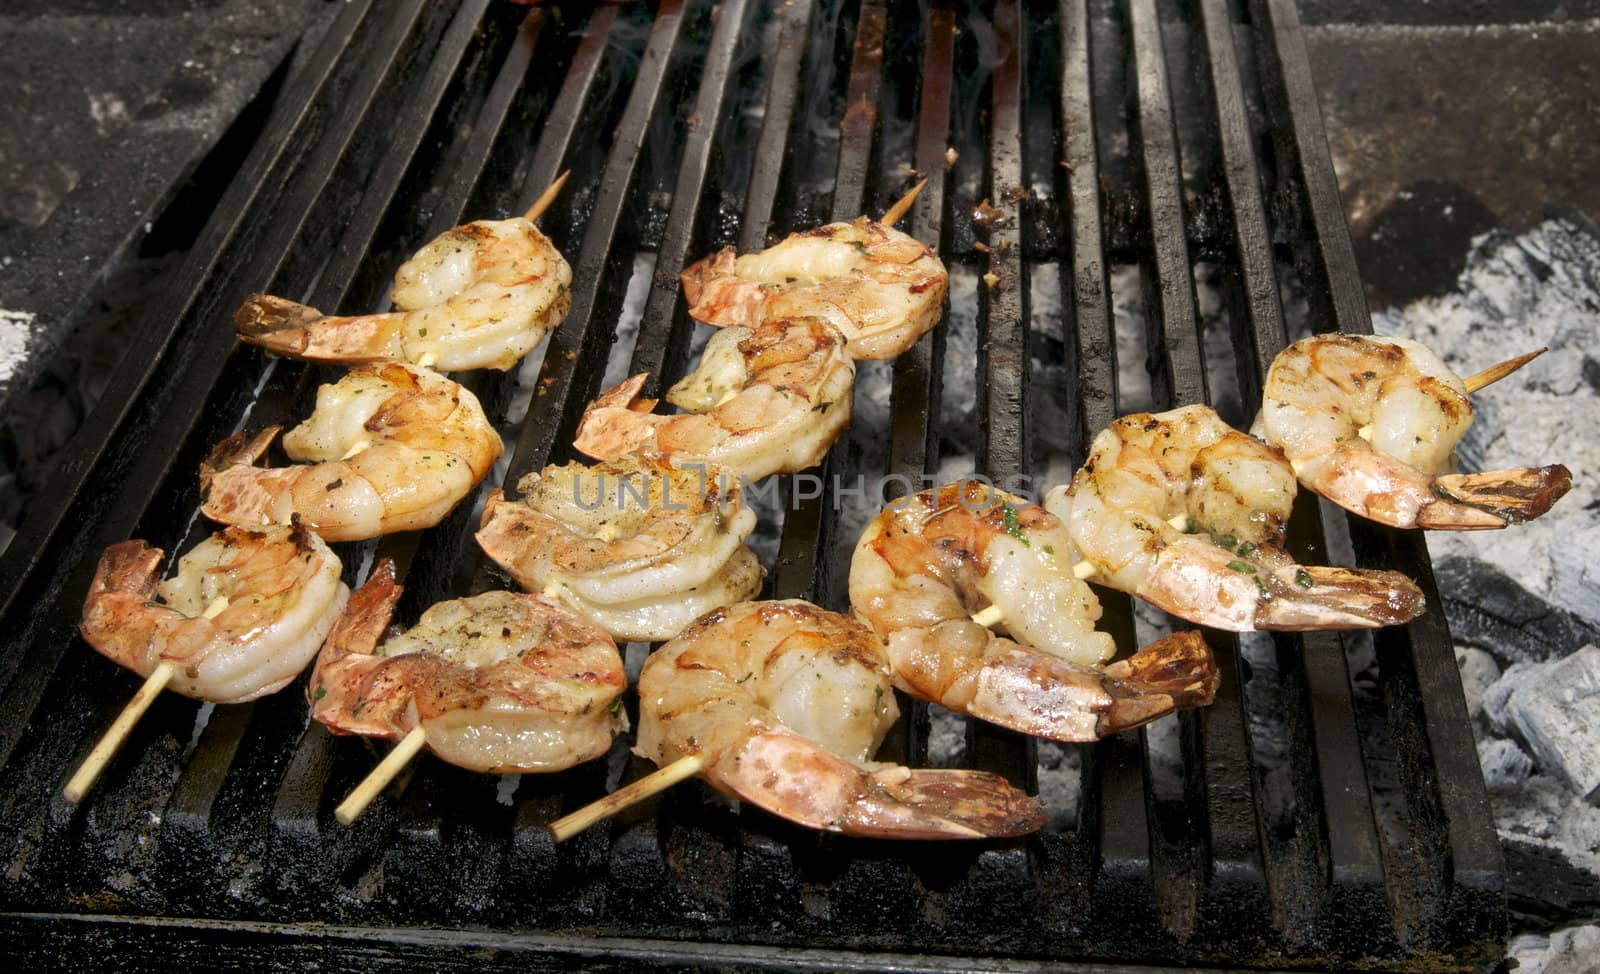 Grilled Shrimp on the grill to cook